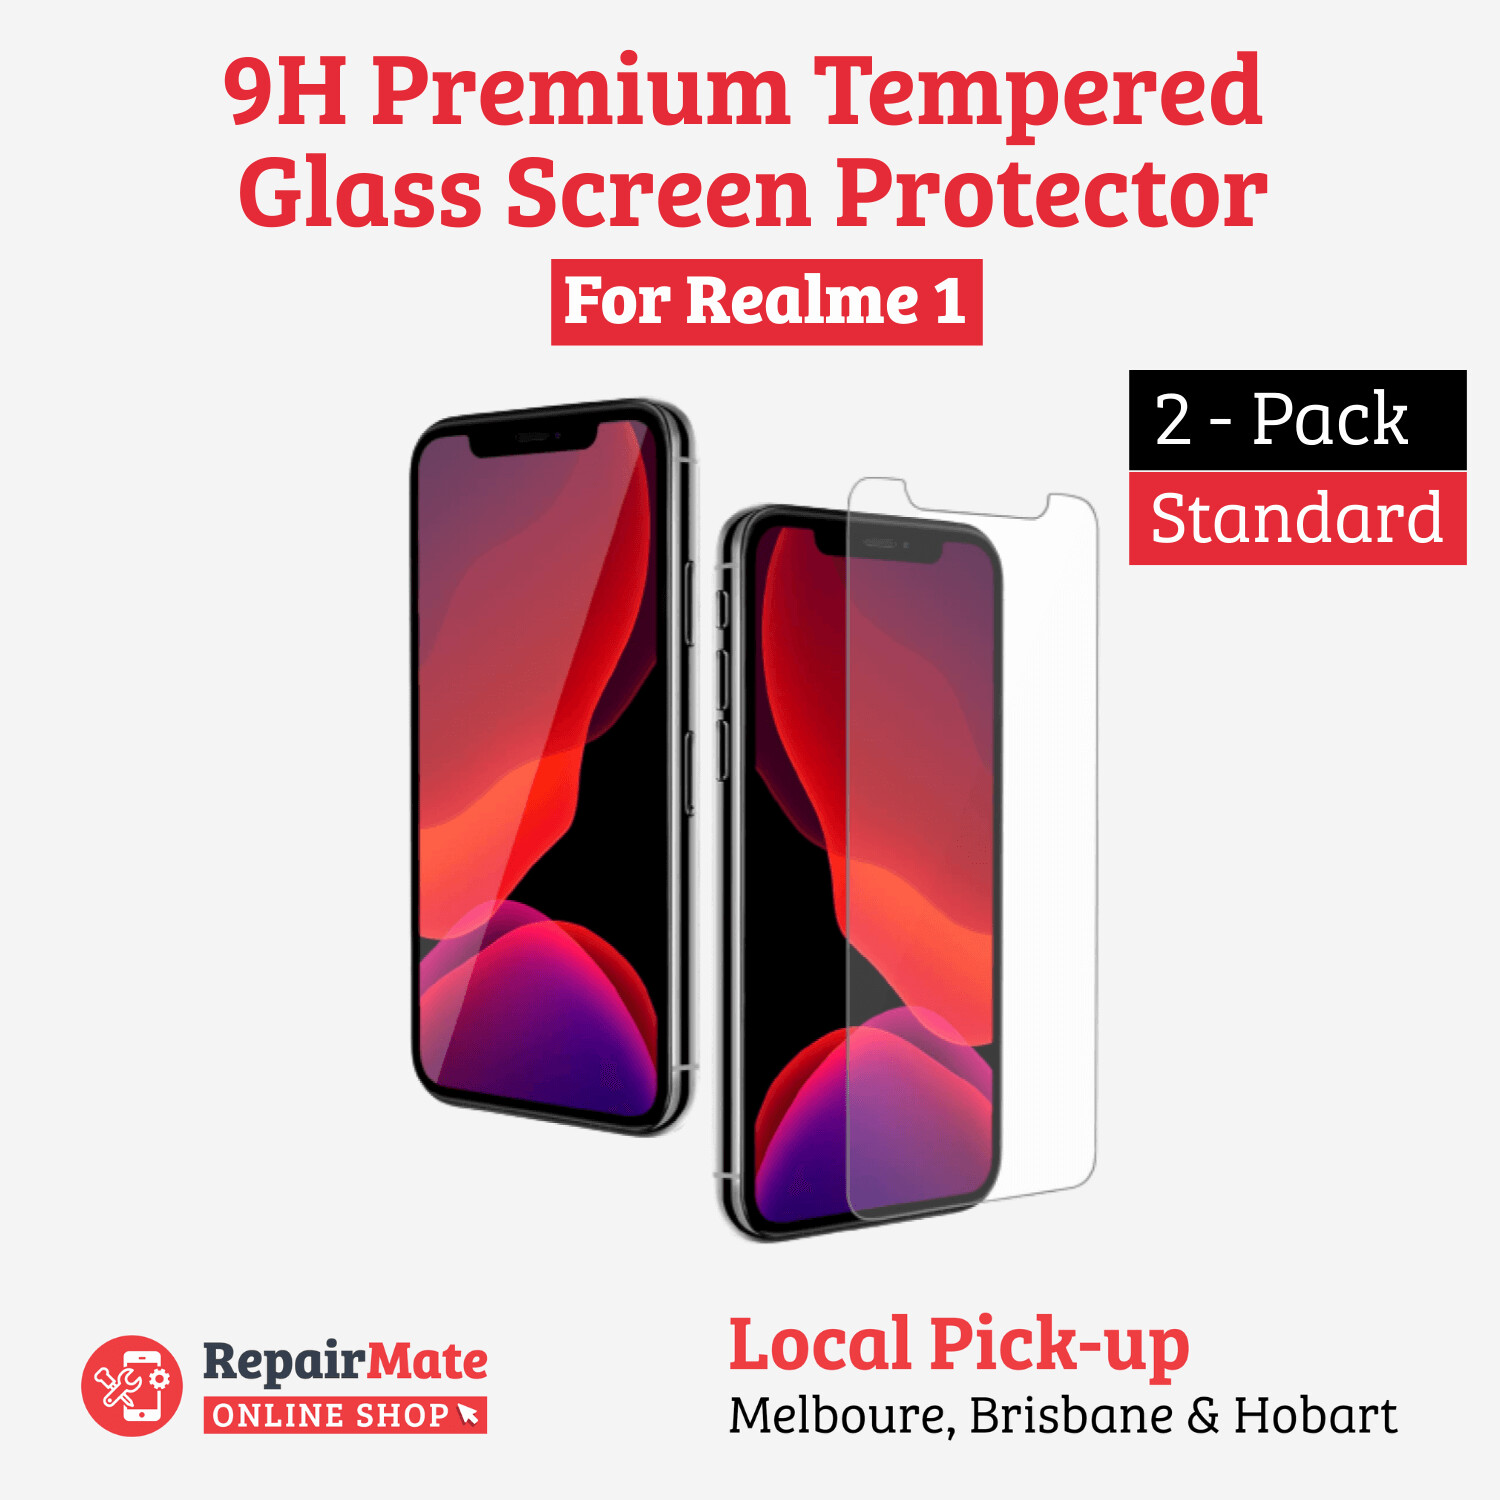 Realme 1 9H Premium Tempered Glass Screen Protector [2 Pack]